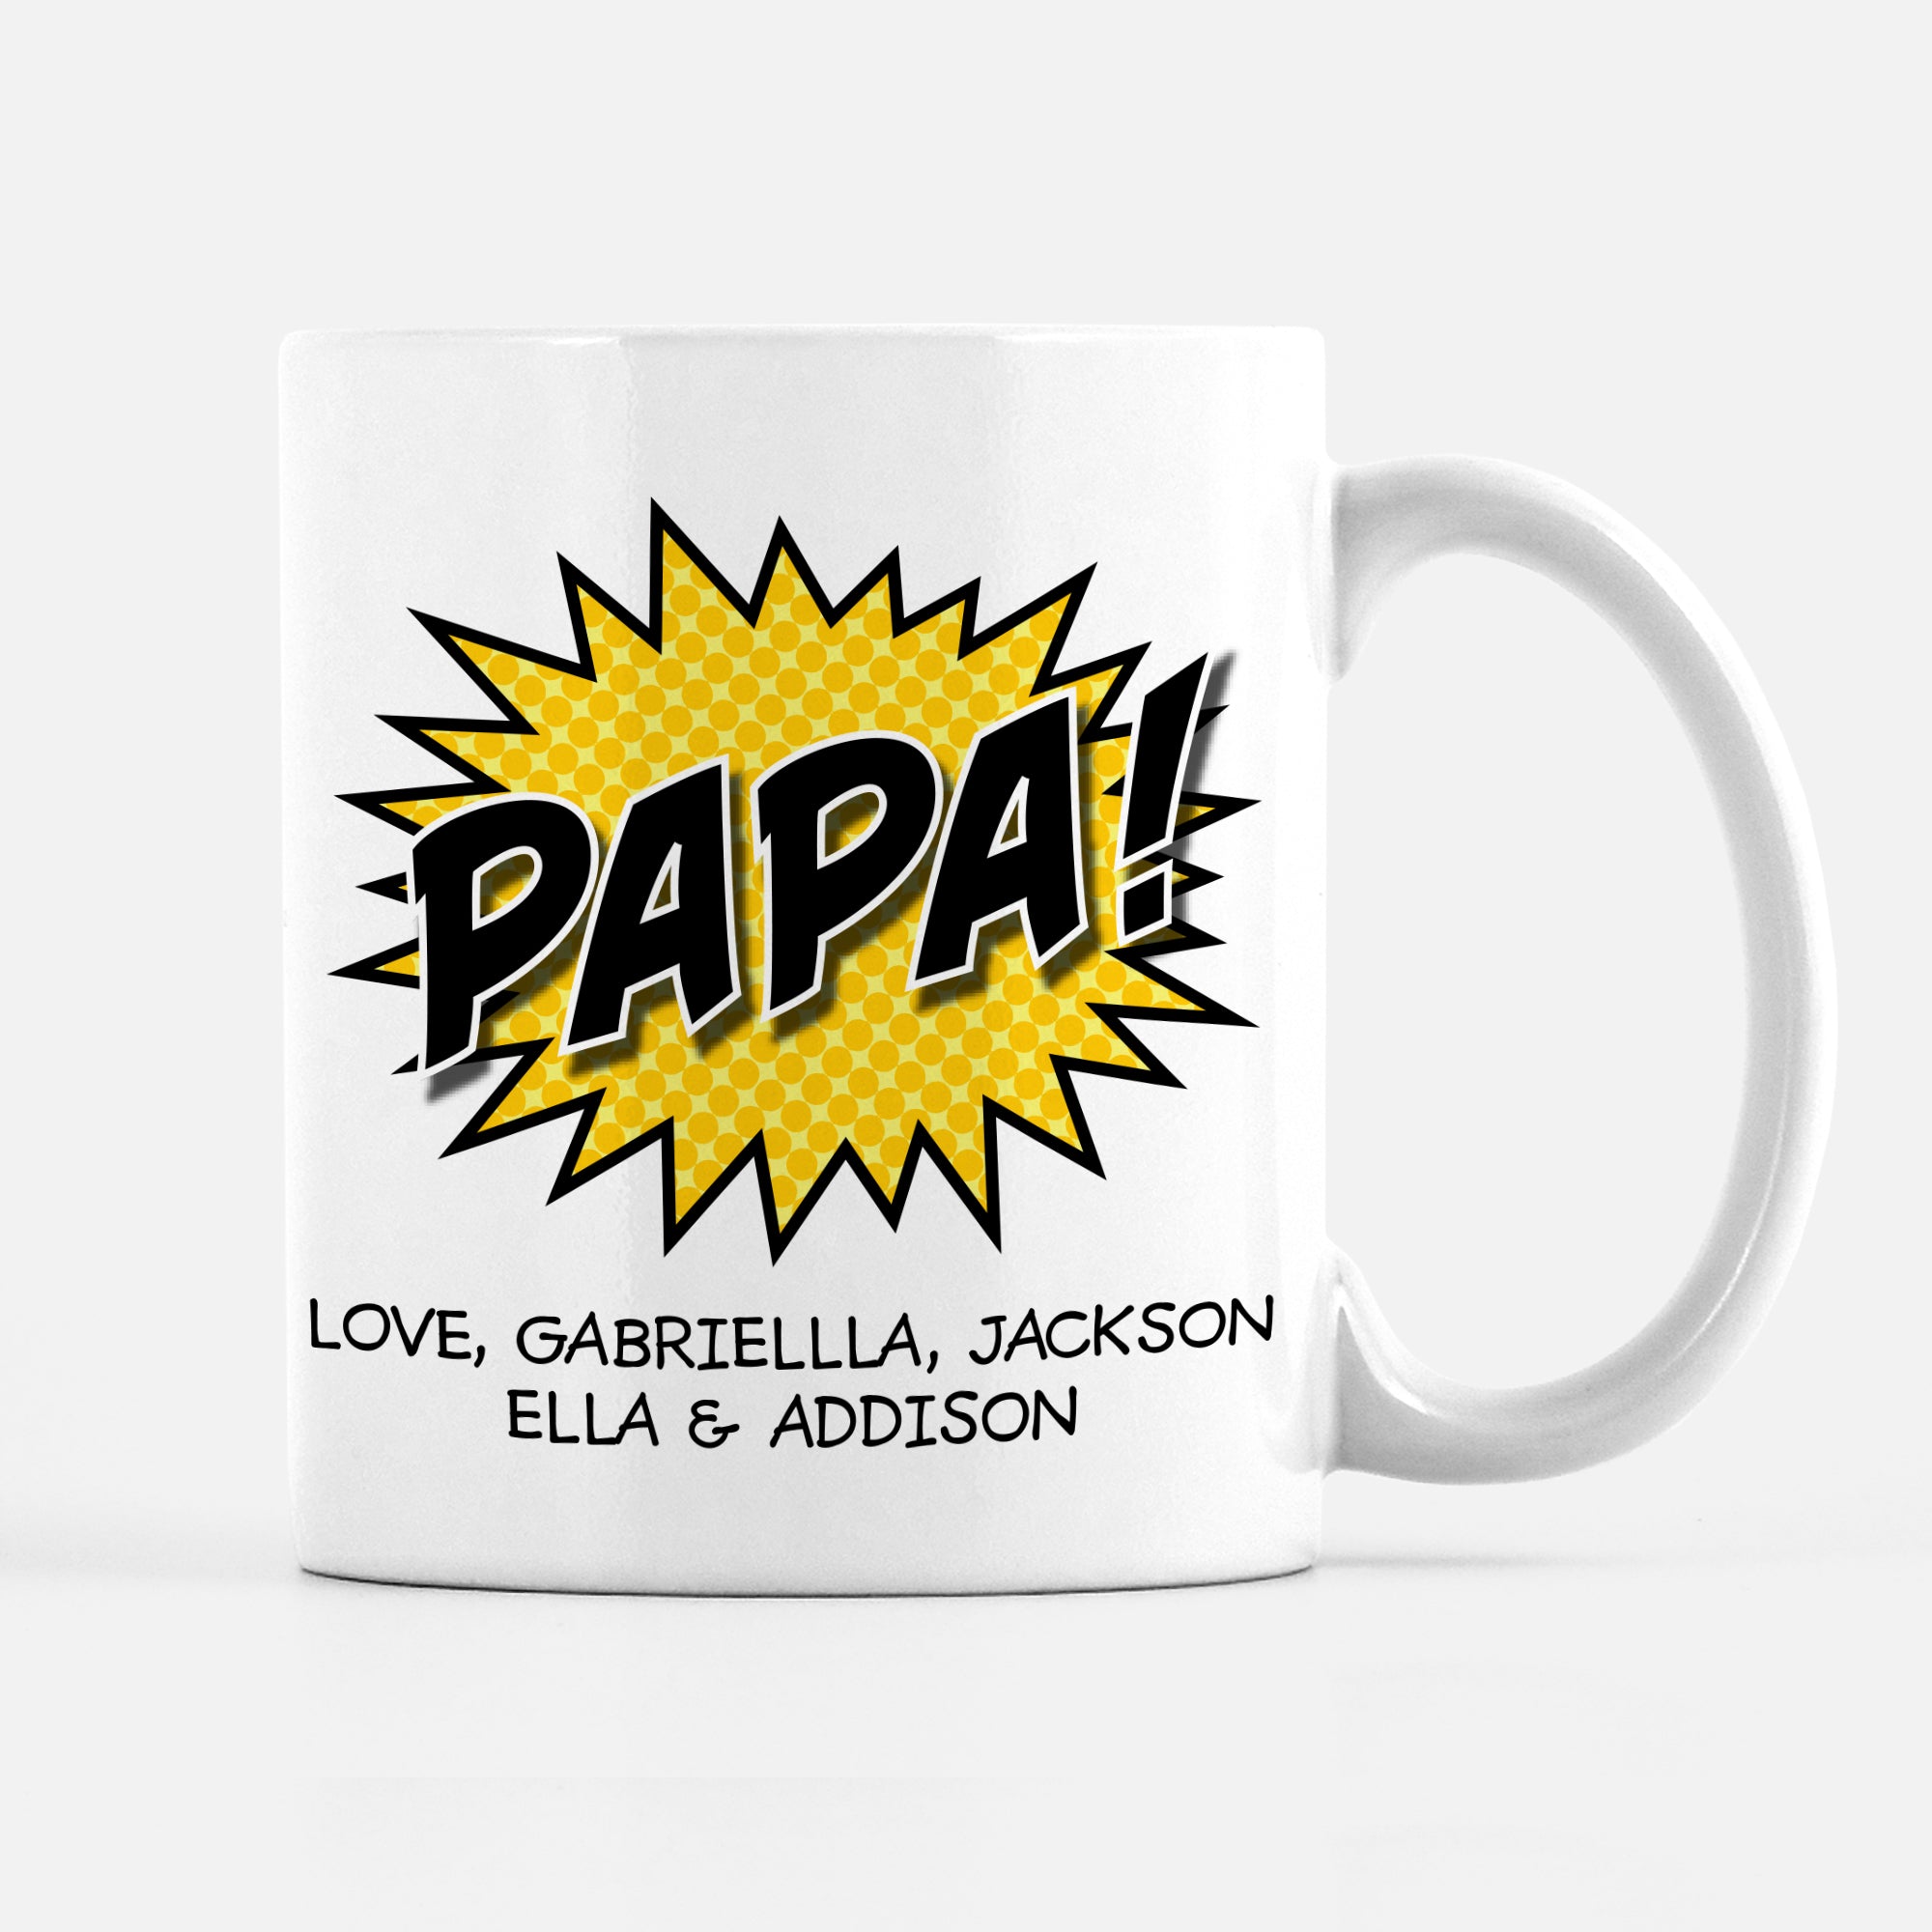 Superhero Father's Day mug, personalized with your names